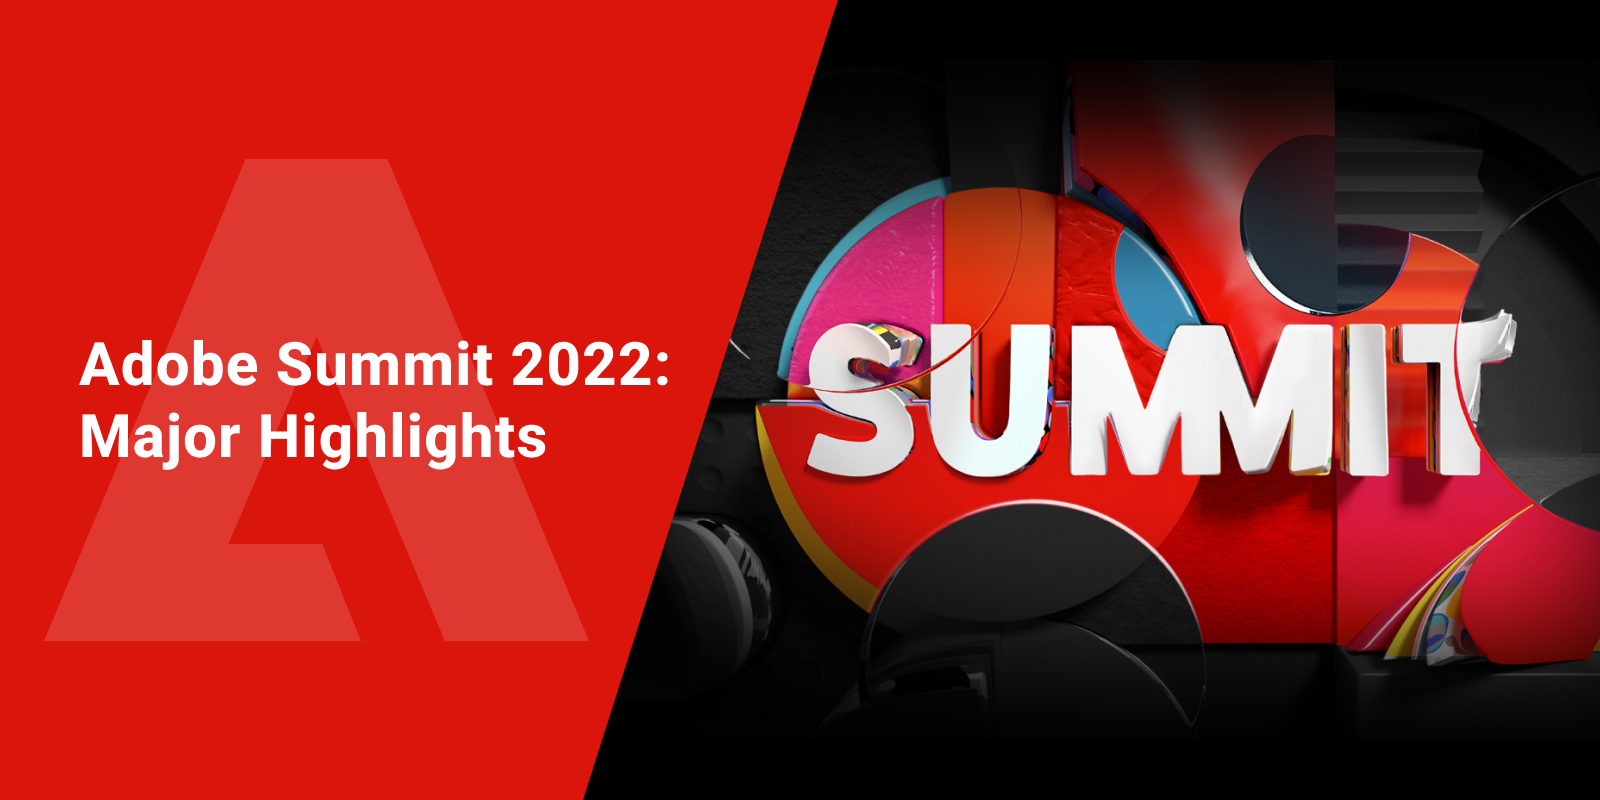 Self-driving stores and CMS innovations: the coolest things from Adobe Summit 2022